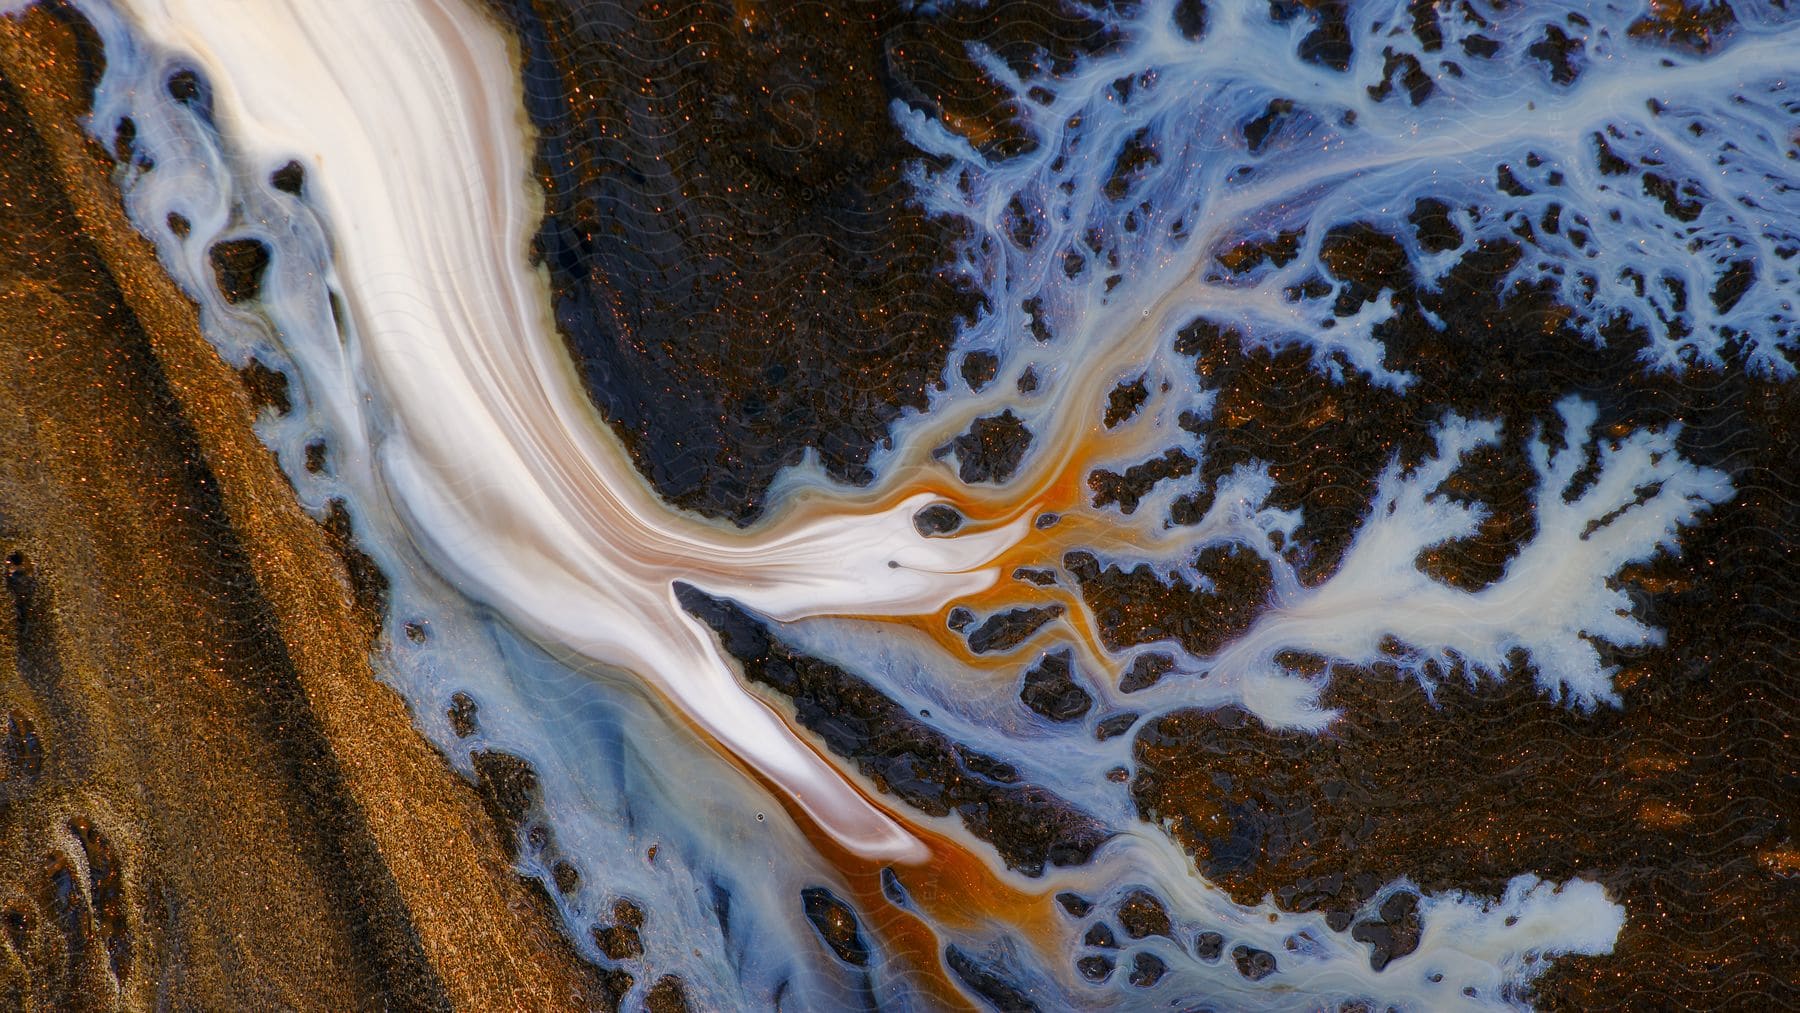 Abstract digital image featuring white water and land